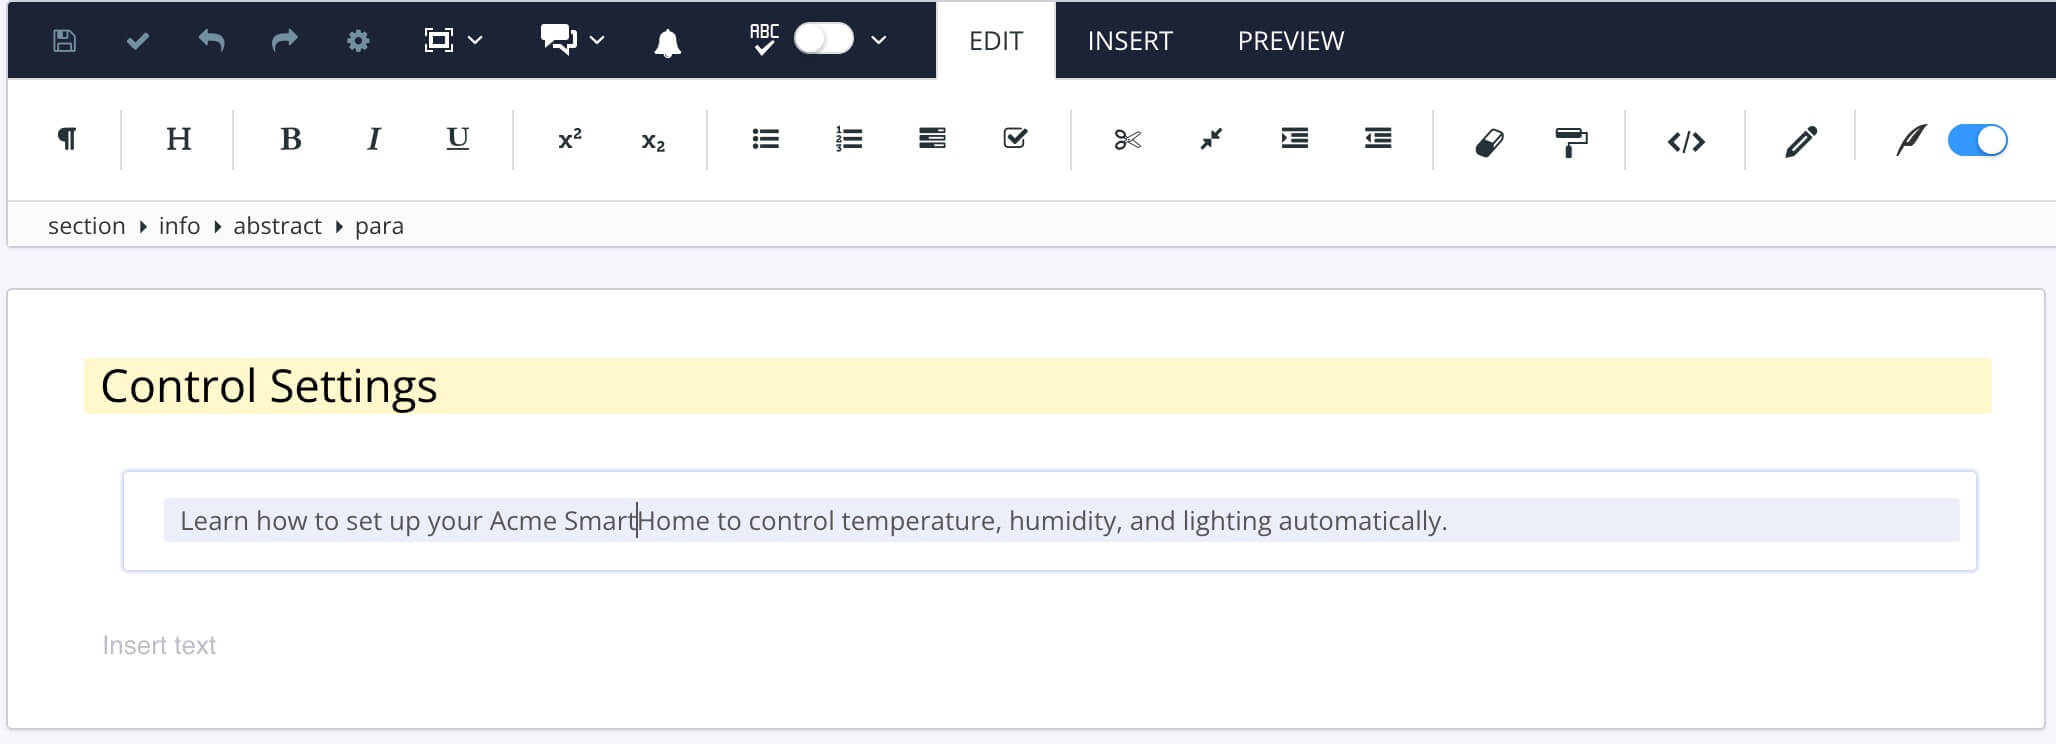 A topic in the Paligo editor. An info element has been added and inside that, an abstract element. Inside the abstract element there is a para element containing the text for the description.